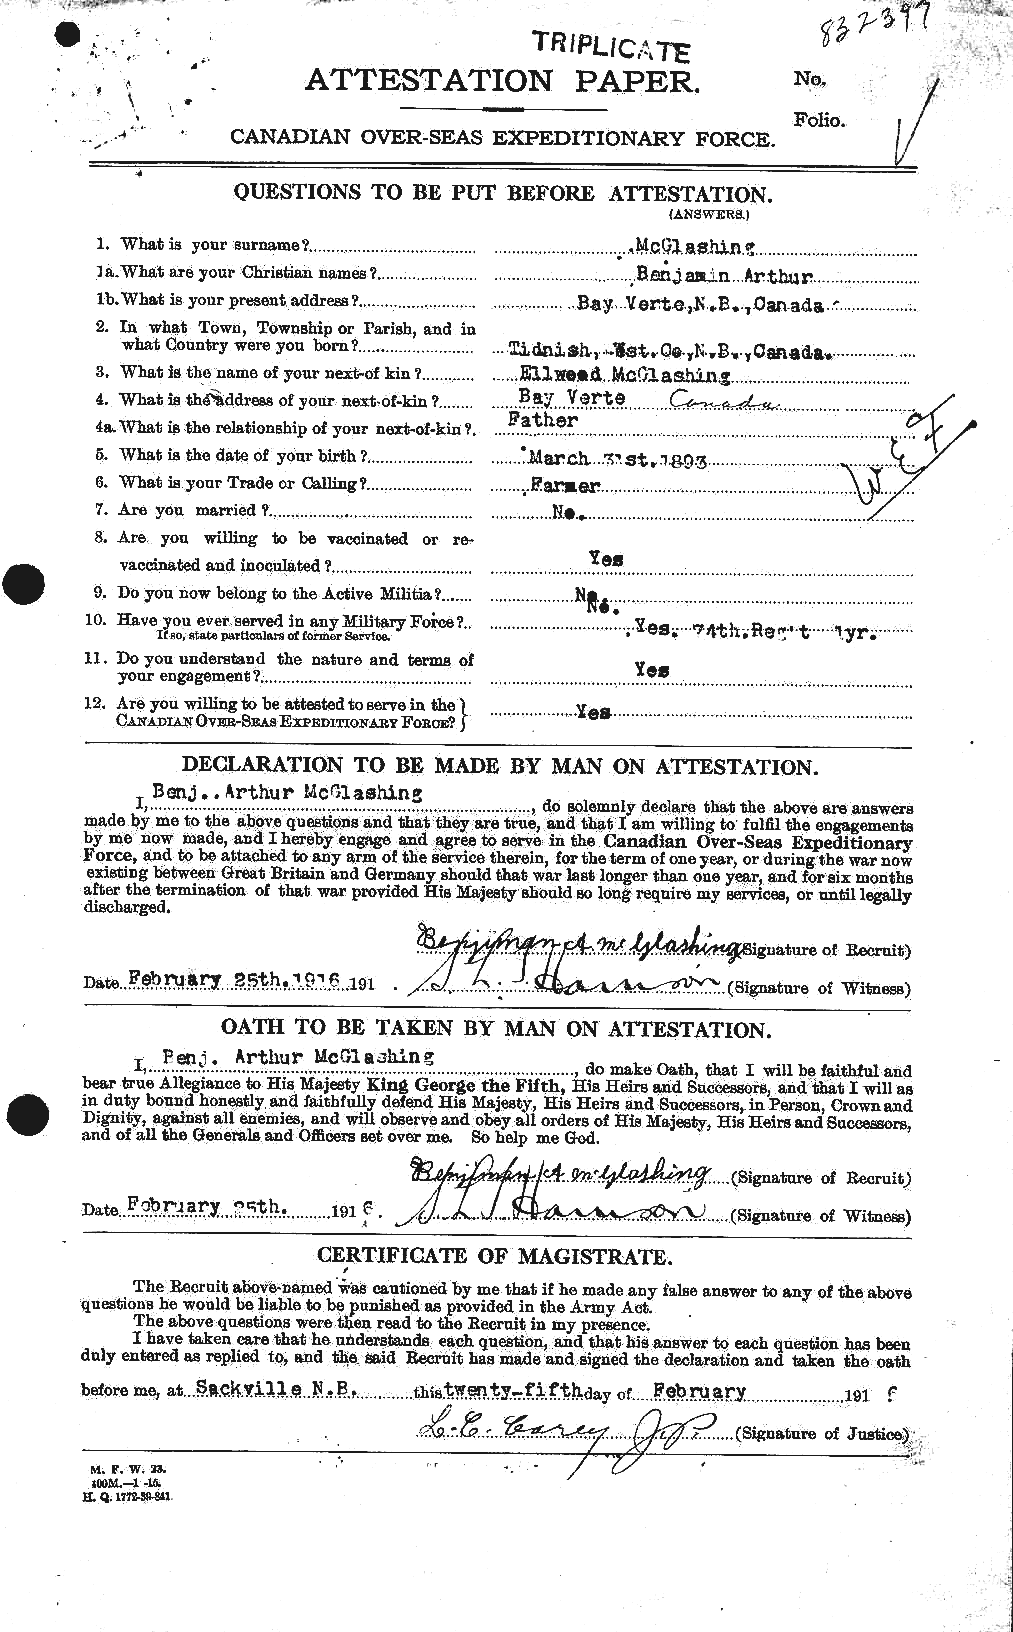 Personnel Records of the First World War - CEF 528424a